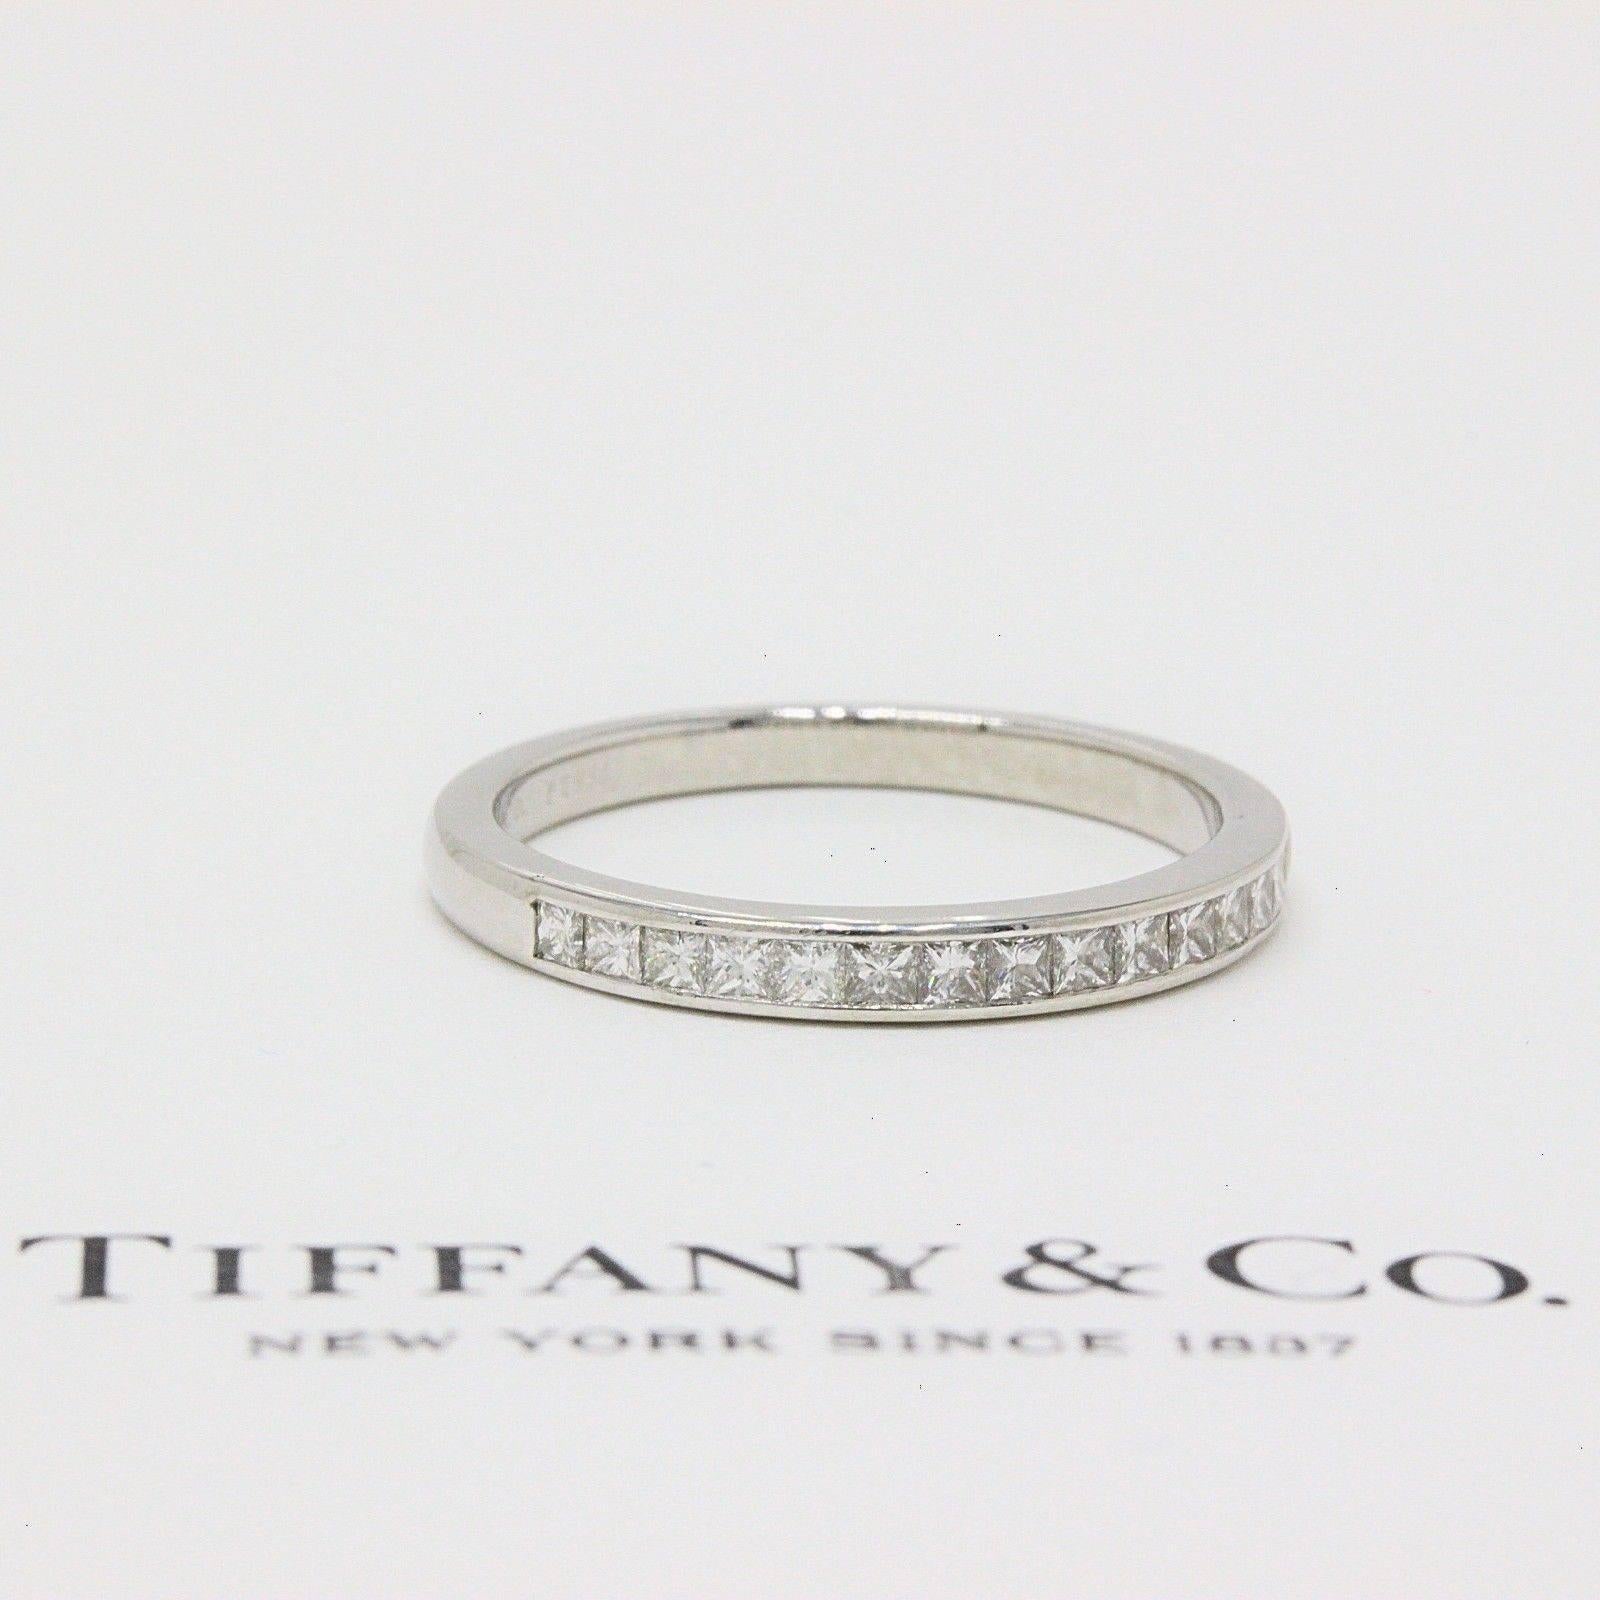 Tiffany & Co. Square Cut Diamond Wedding Band Ring in Platinum 0.39 tcw 2.6 MM For Sale 5